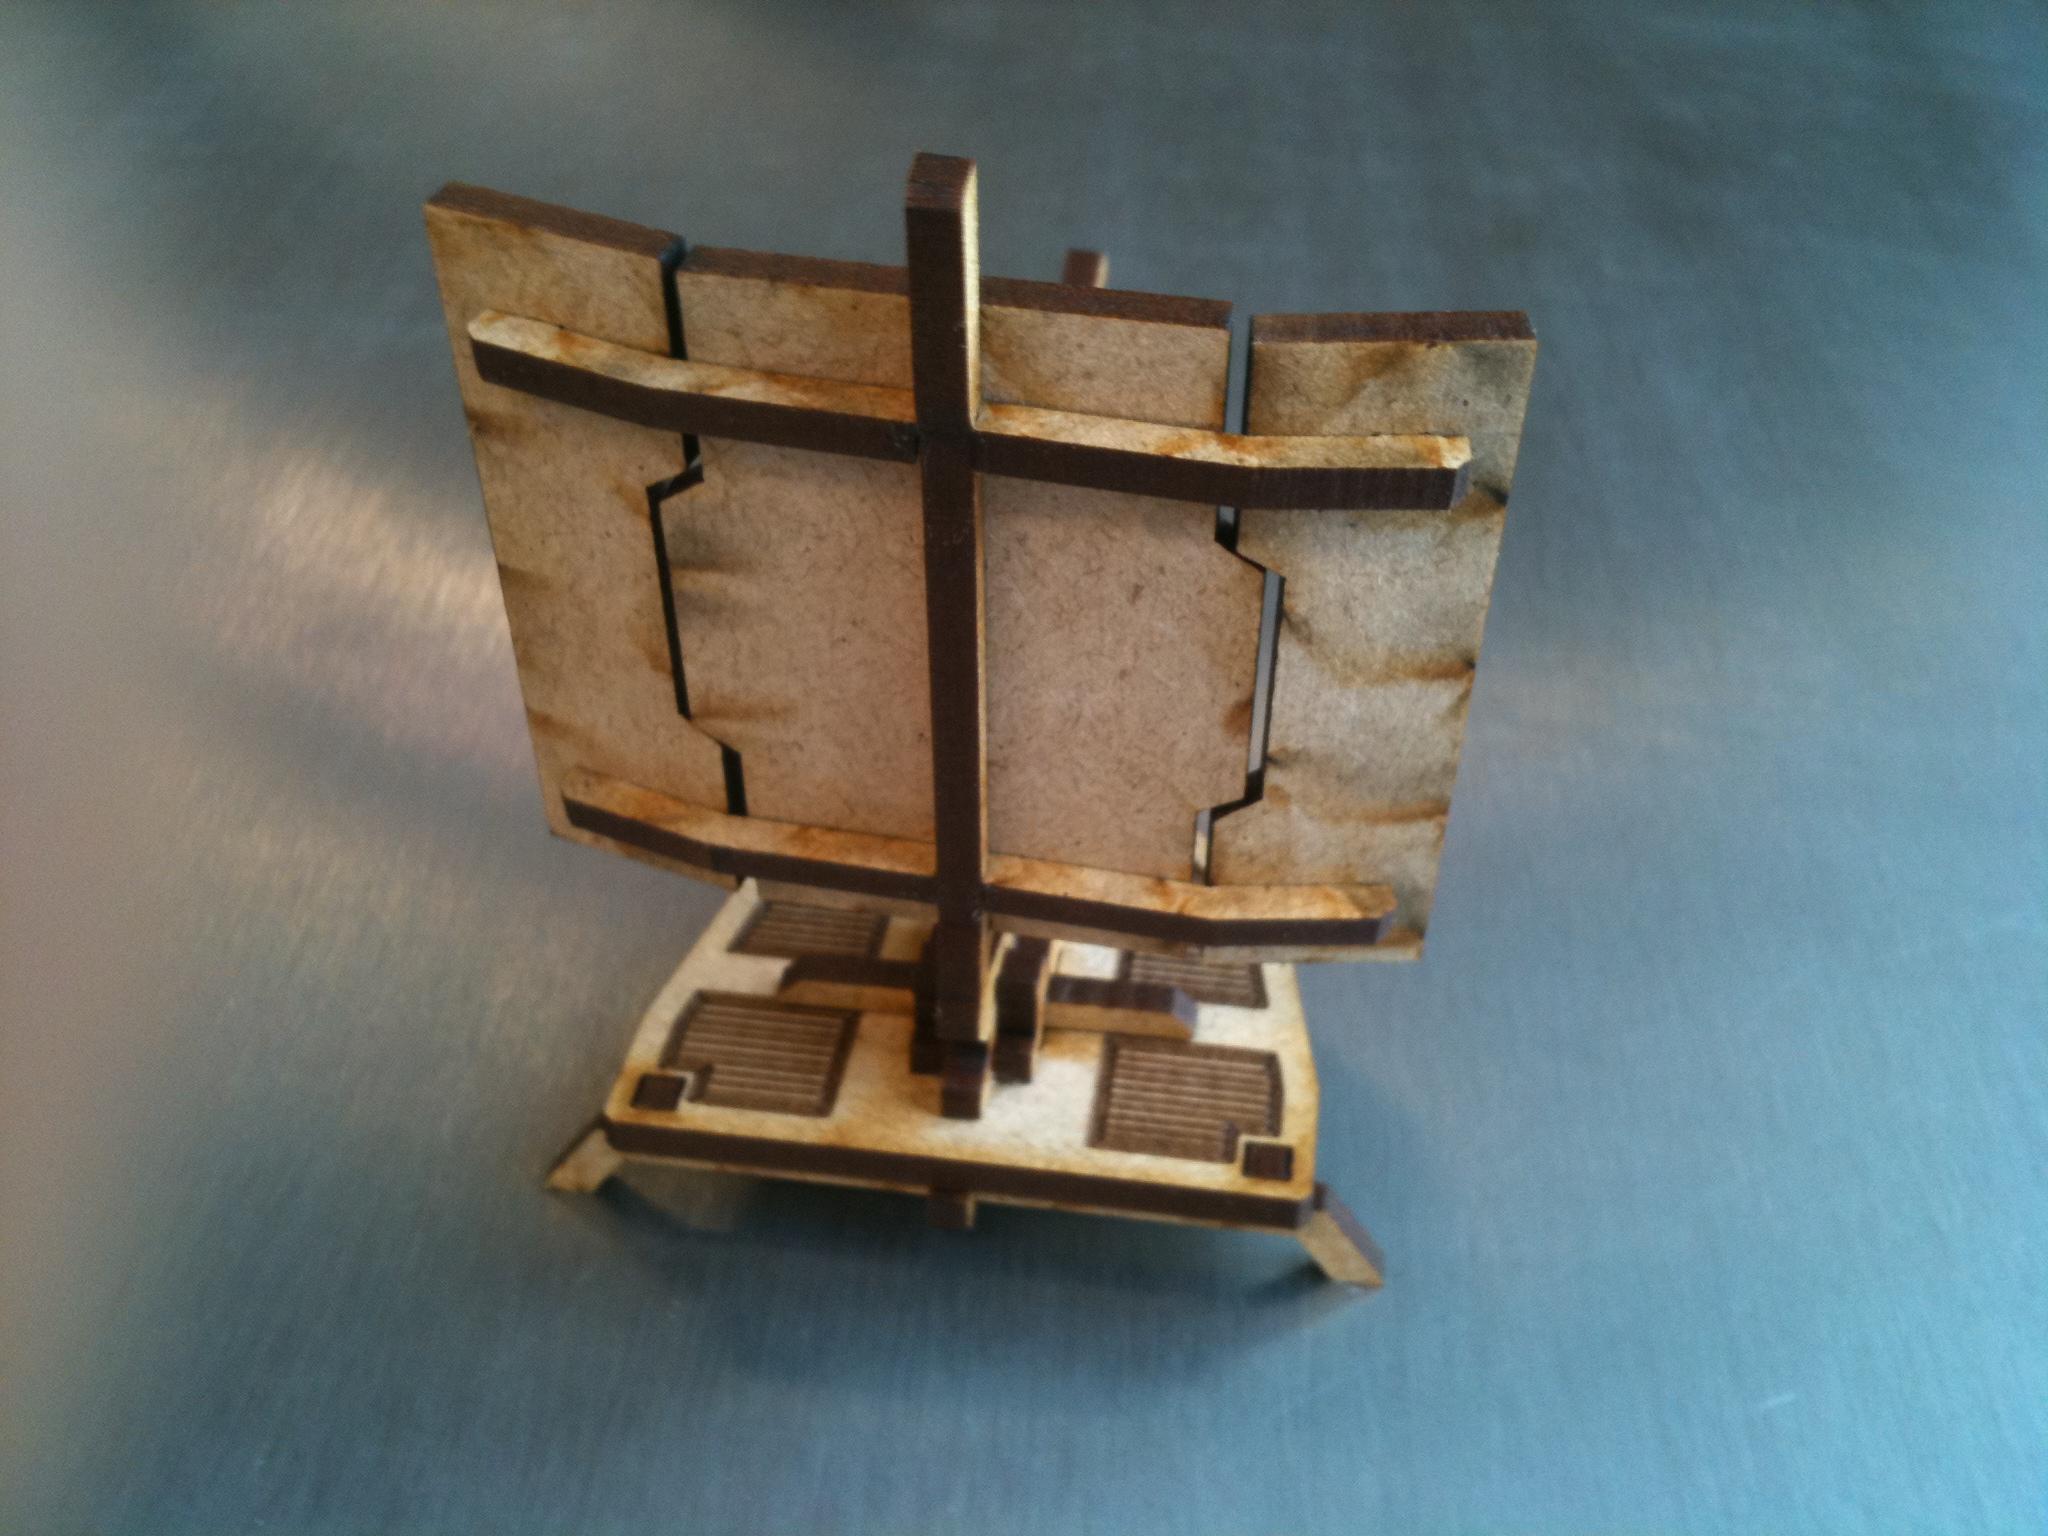 Abstract, Do-it-yourself, Wood Model